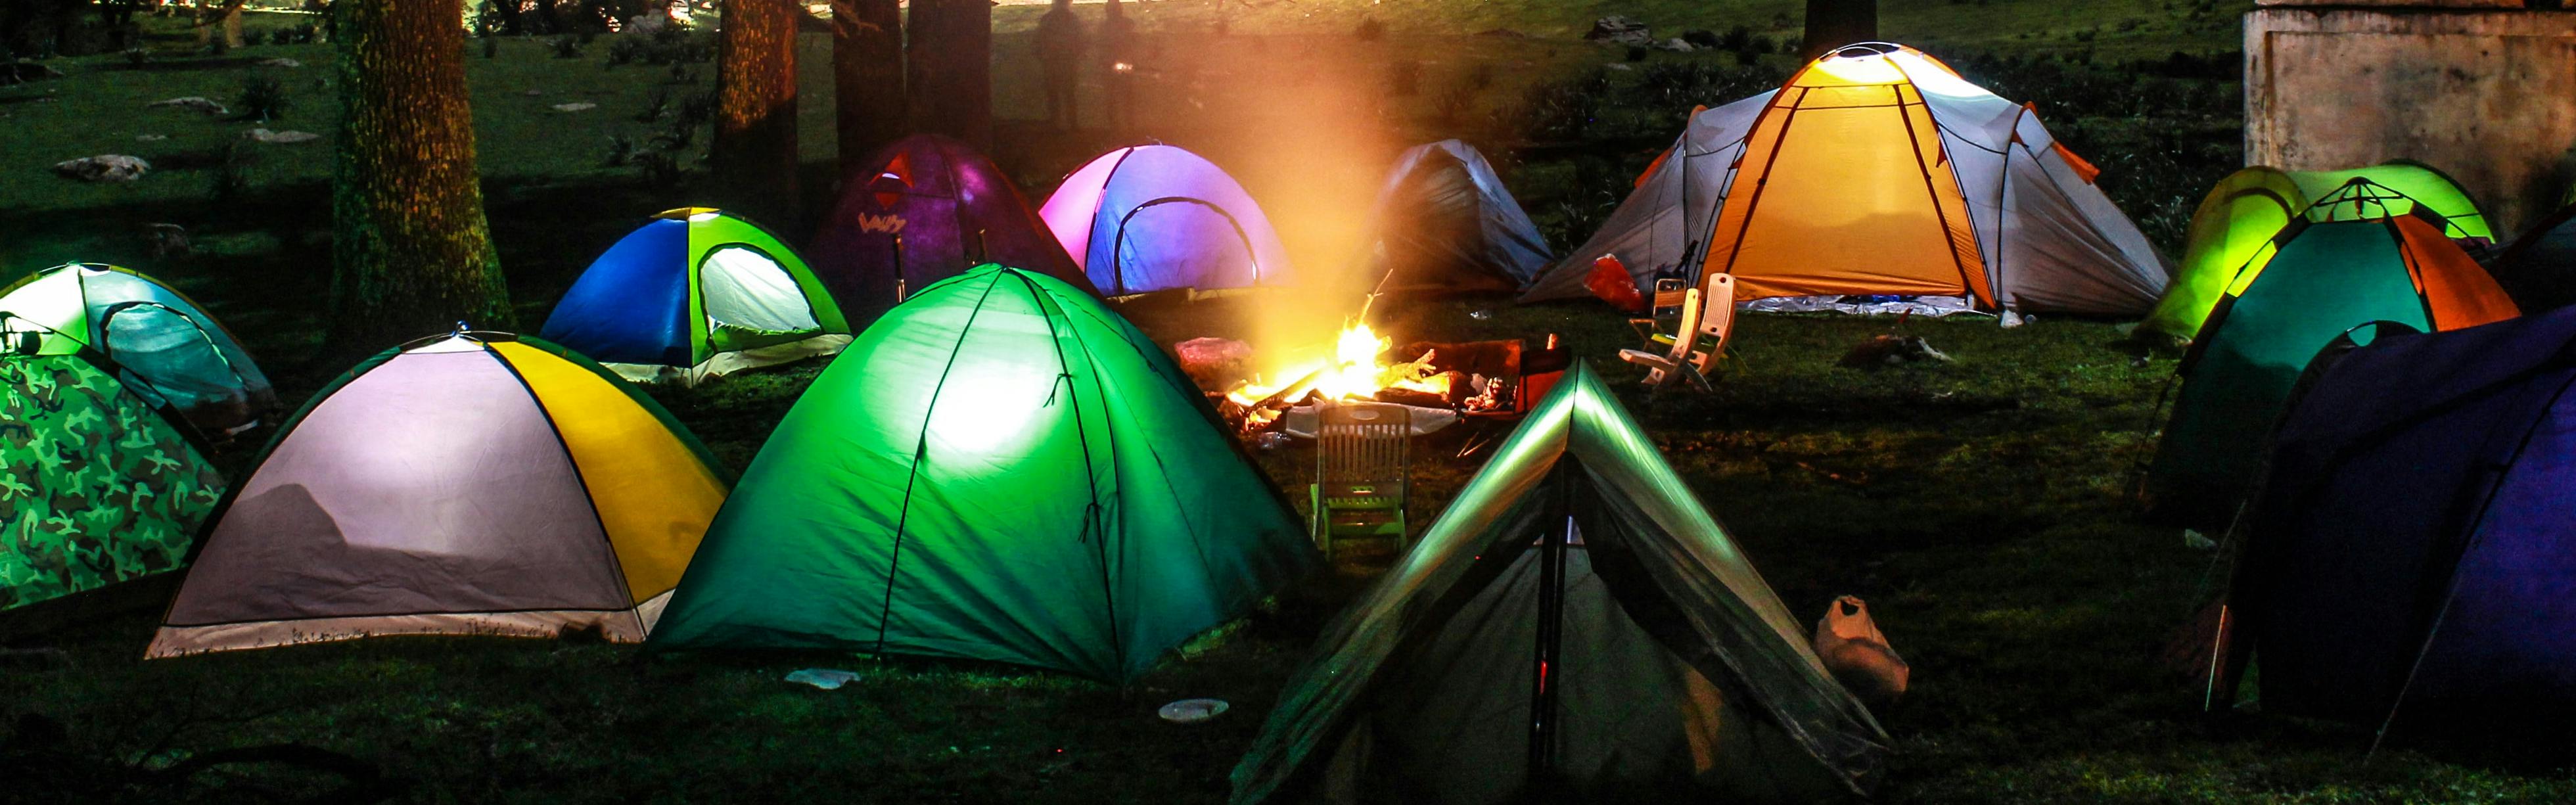 heb vertrouwen personeel plafond What Are the Different Types of Tents? | Curated.com